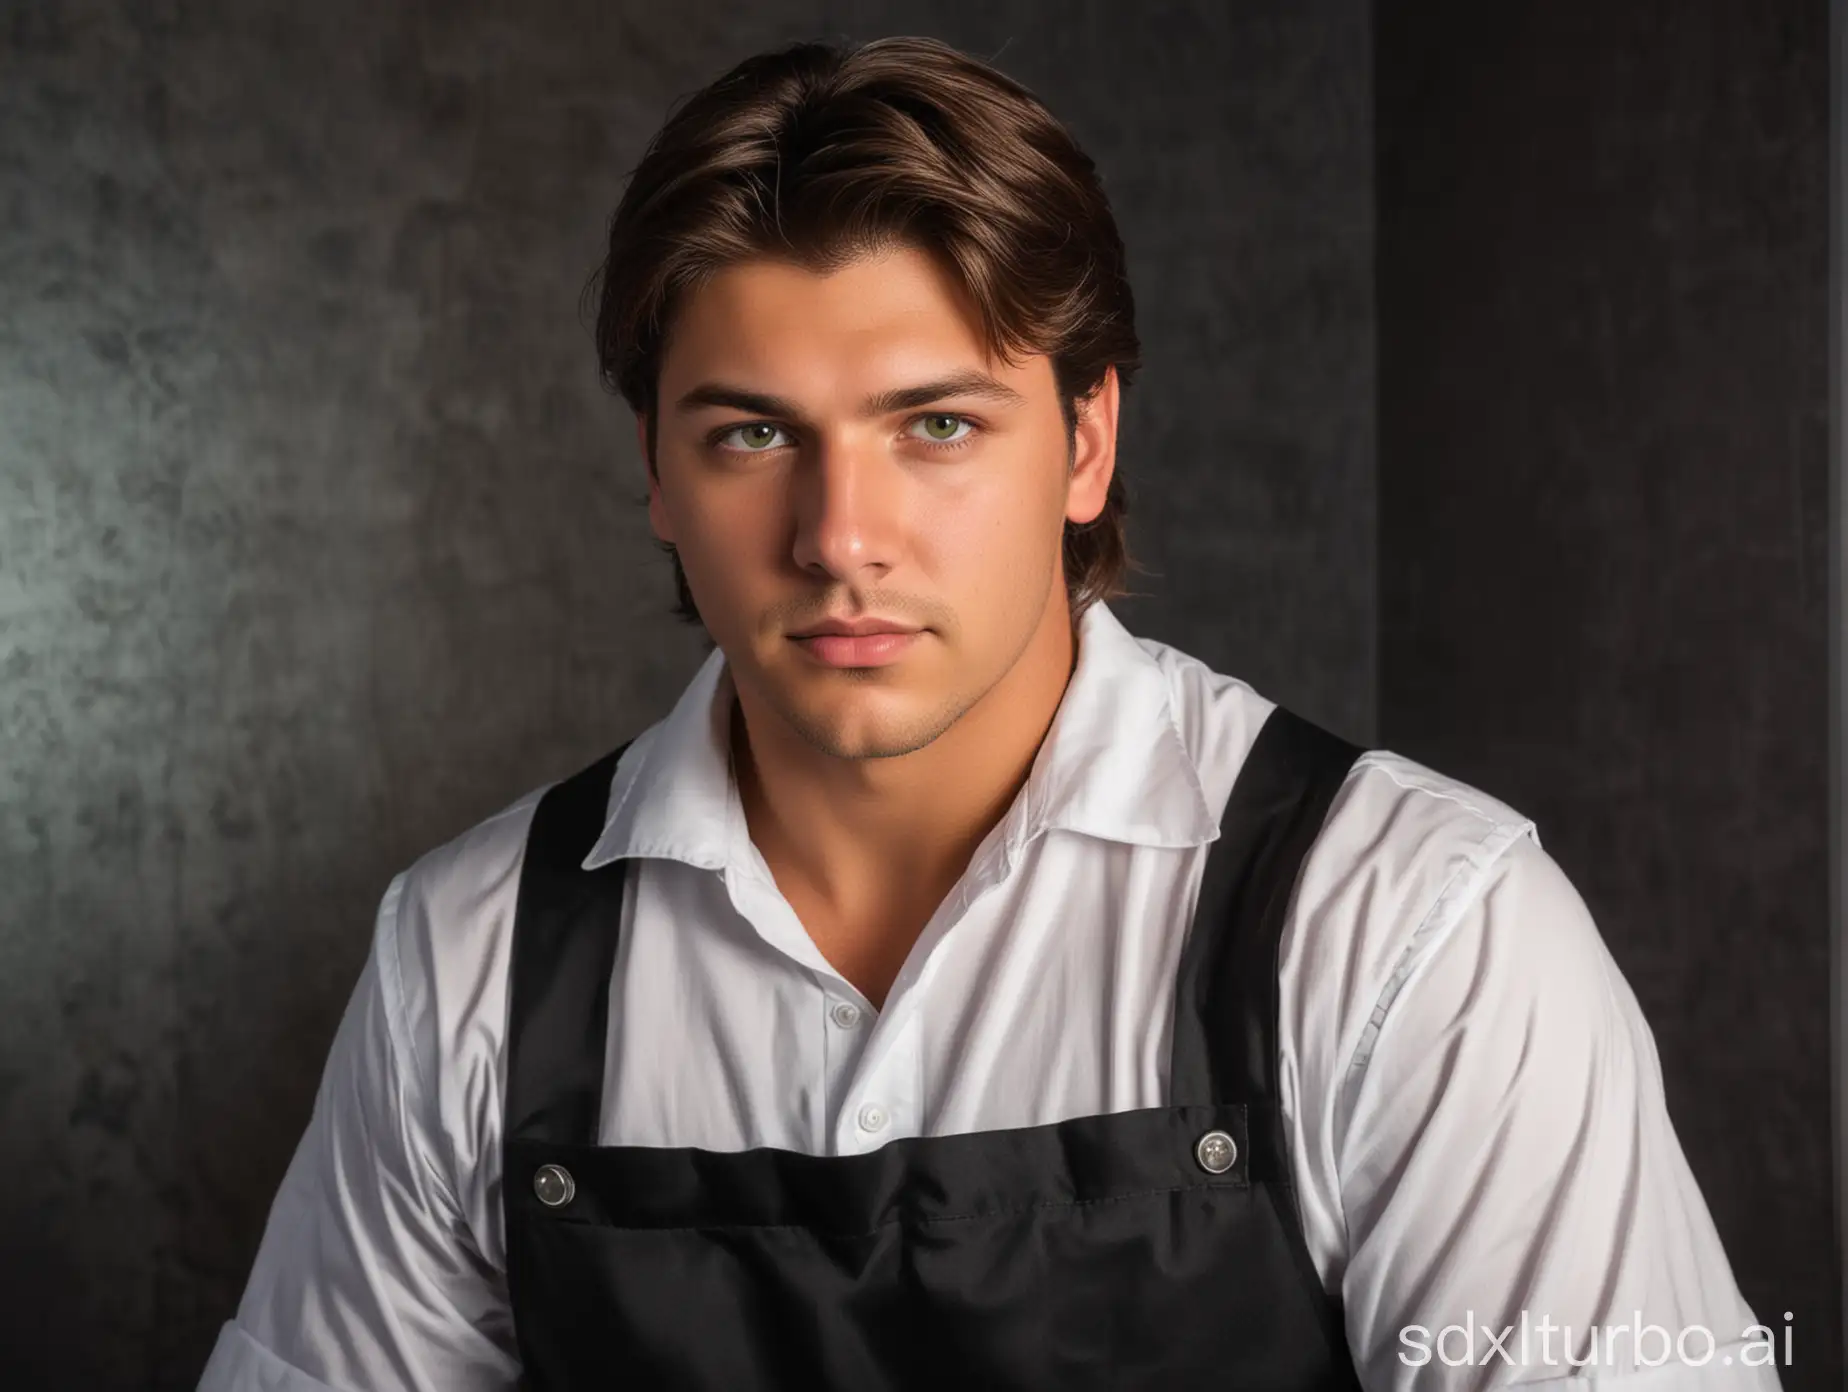 Seductive-Chubby-Young-Man-in-Maid-Uniform-Posing-in-Dimly-Lit-Room